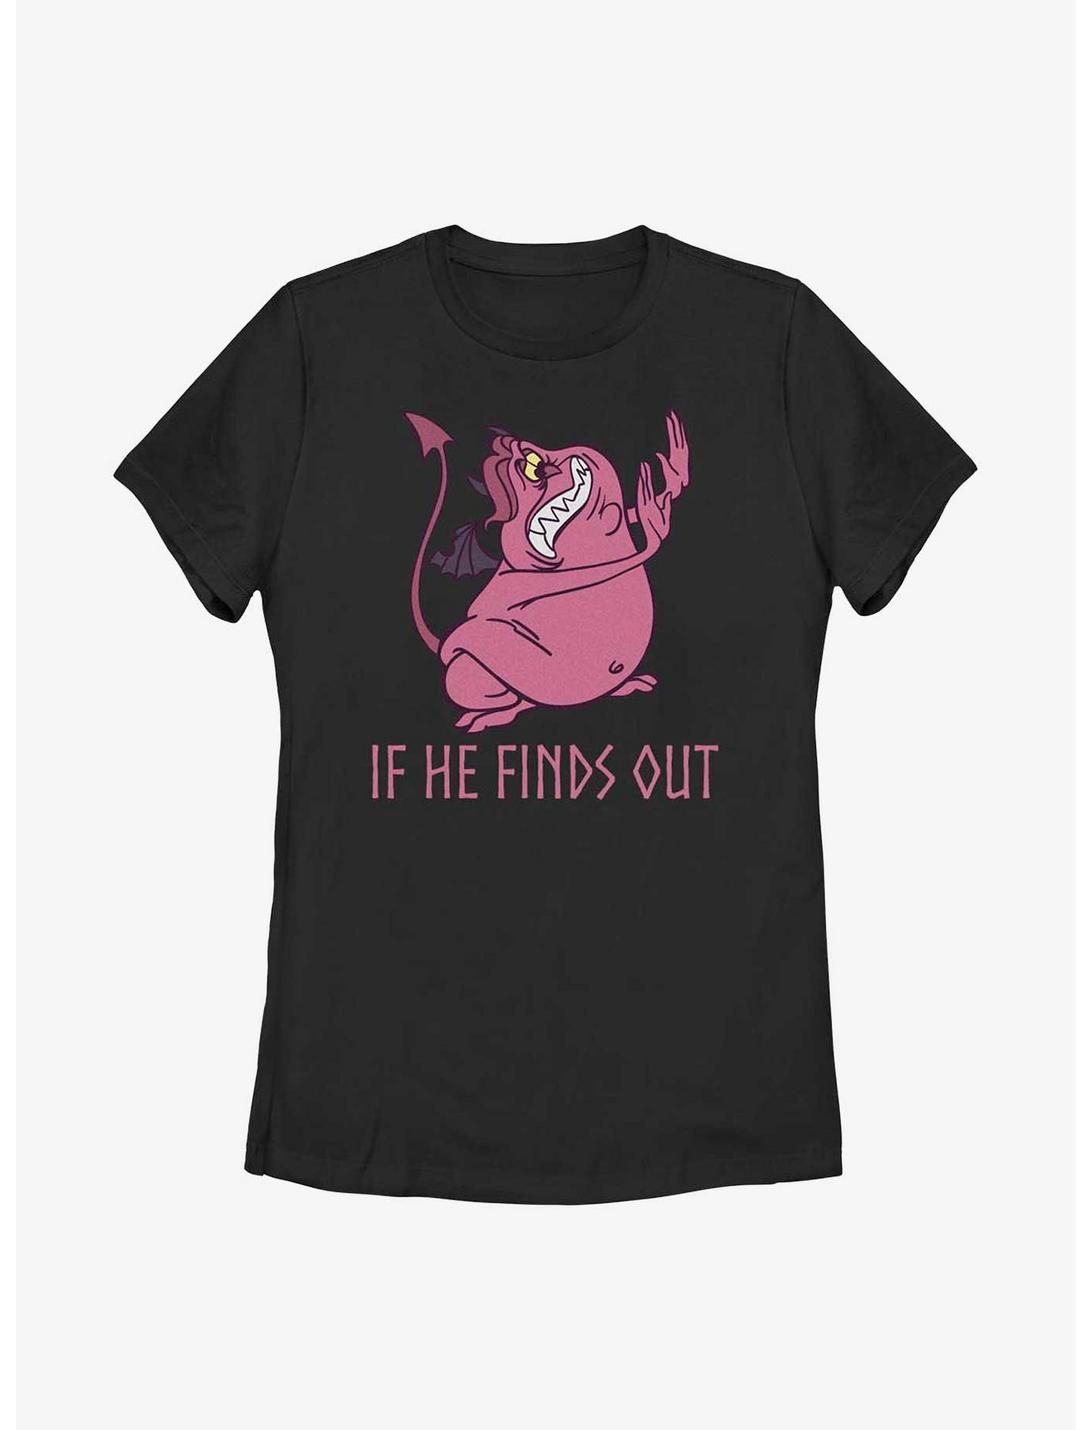 Disney Hercules Pain If He Finds Out Womens T-Shirt, BLACK, hi-res